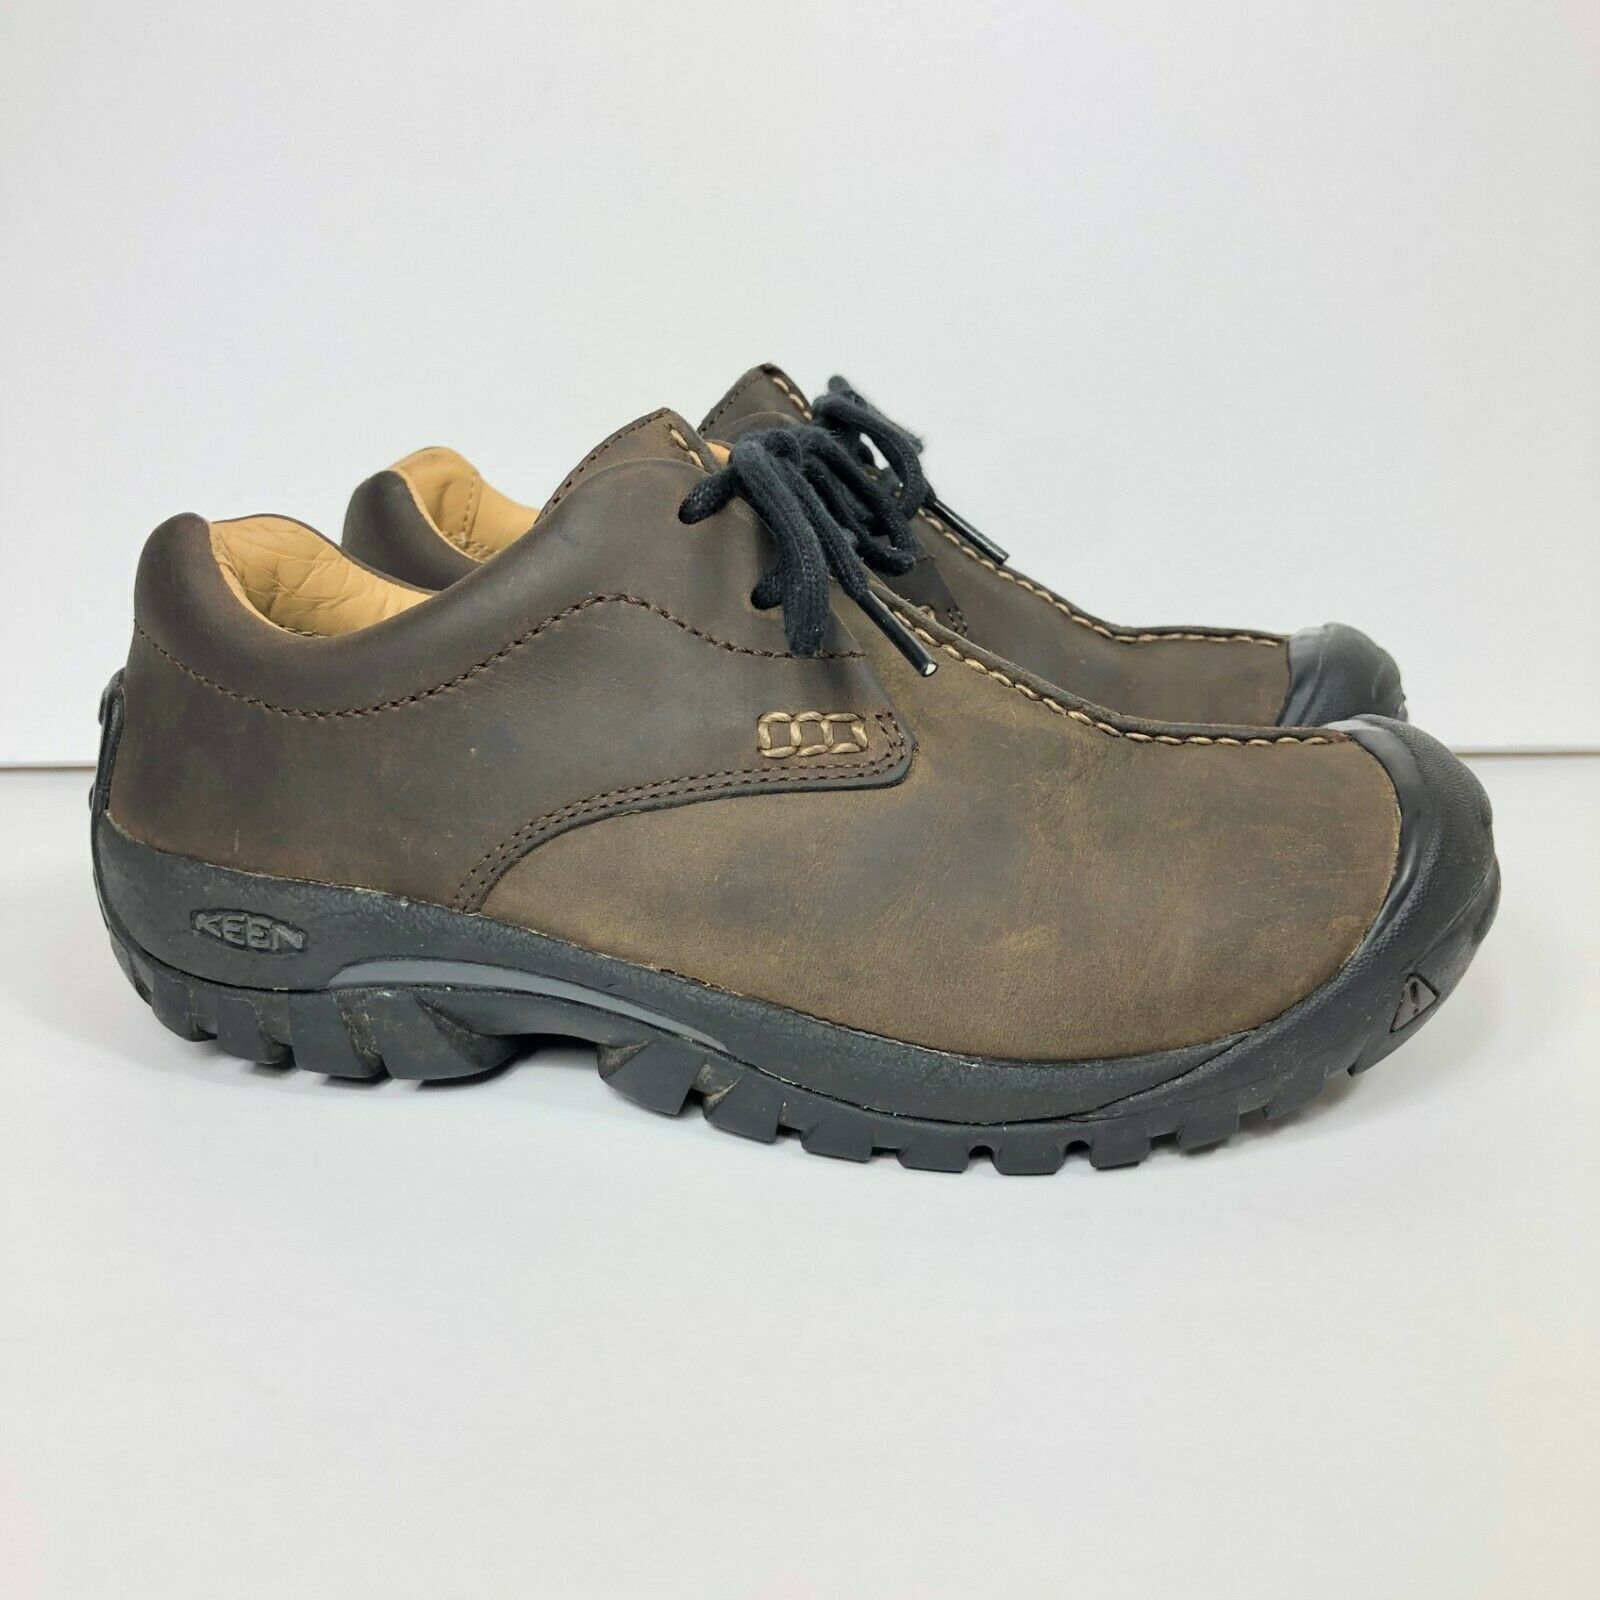 KEEN XT 0605 Women's Size US 7 Leather Casual Outdoor Hiking Walking Shoes Brown